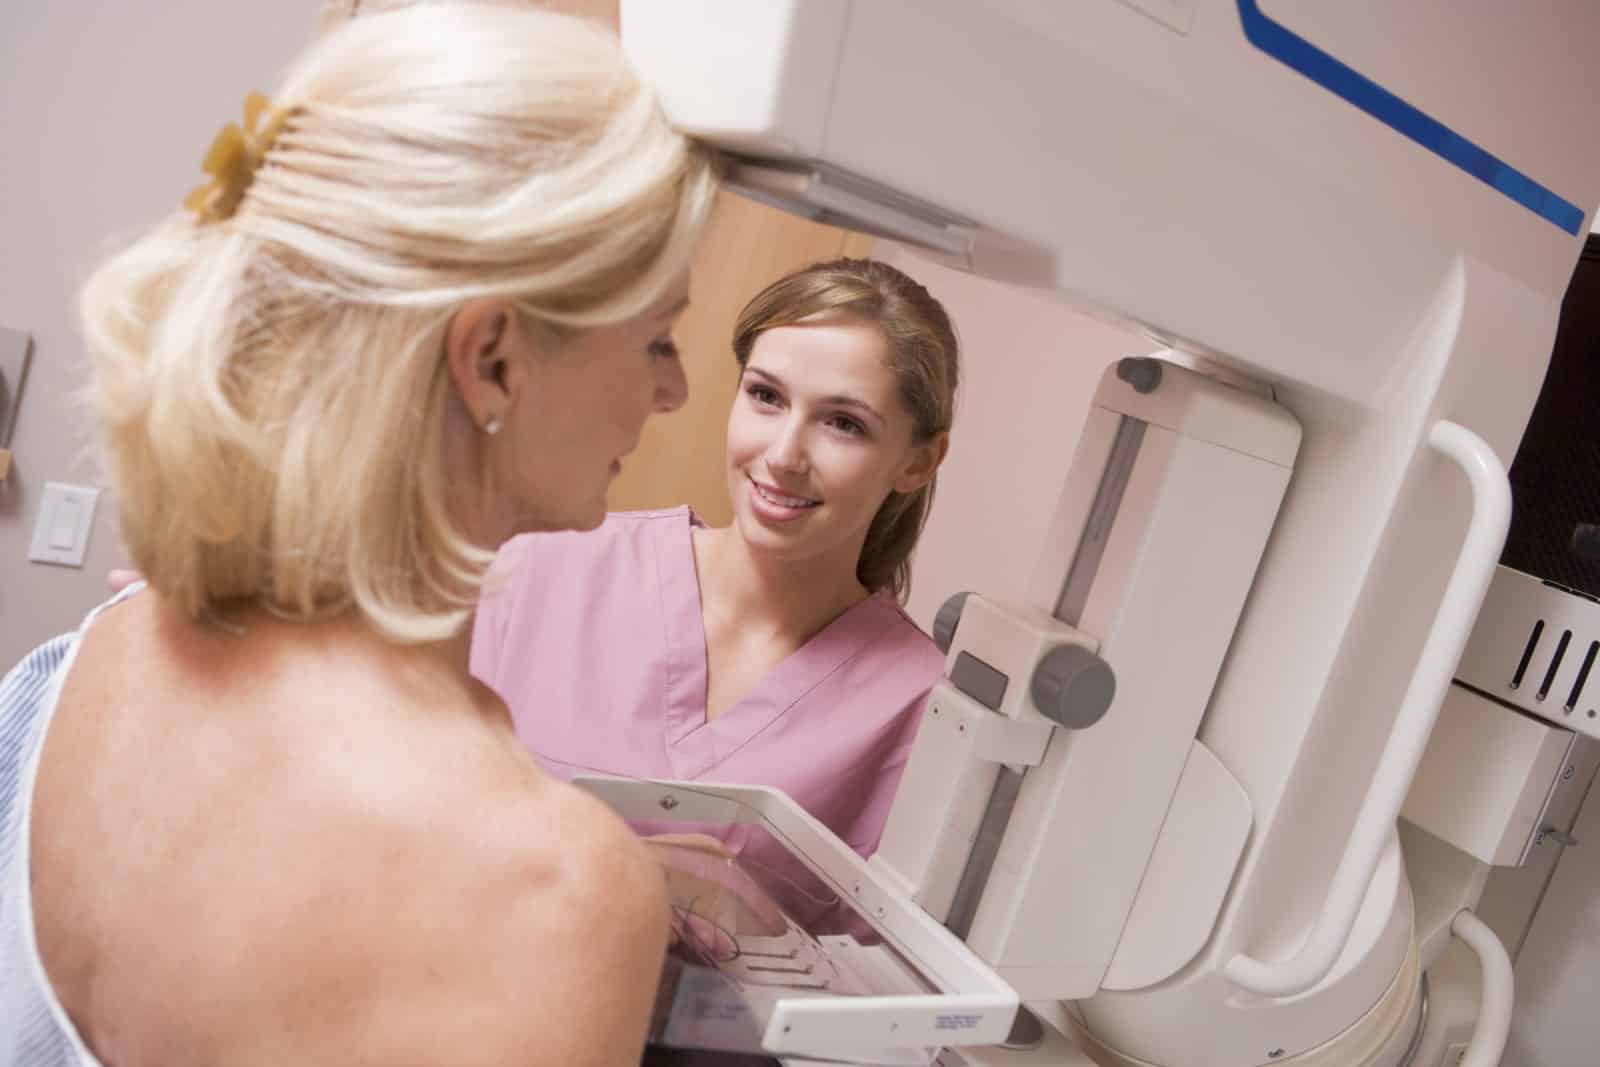 does Medicare cover 3-D mammograms